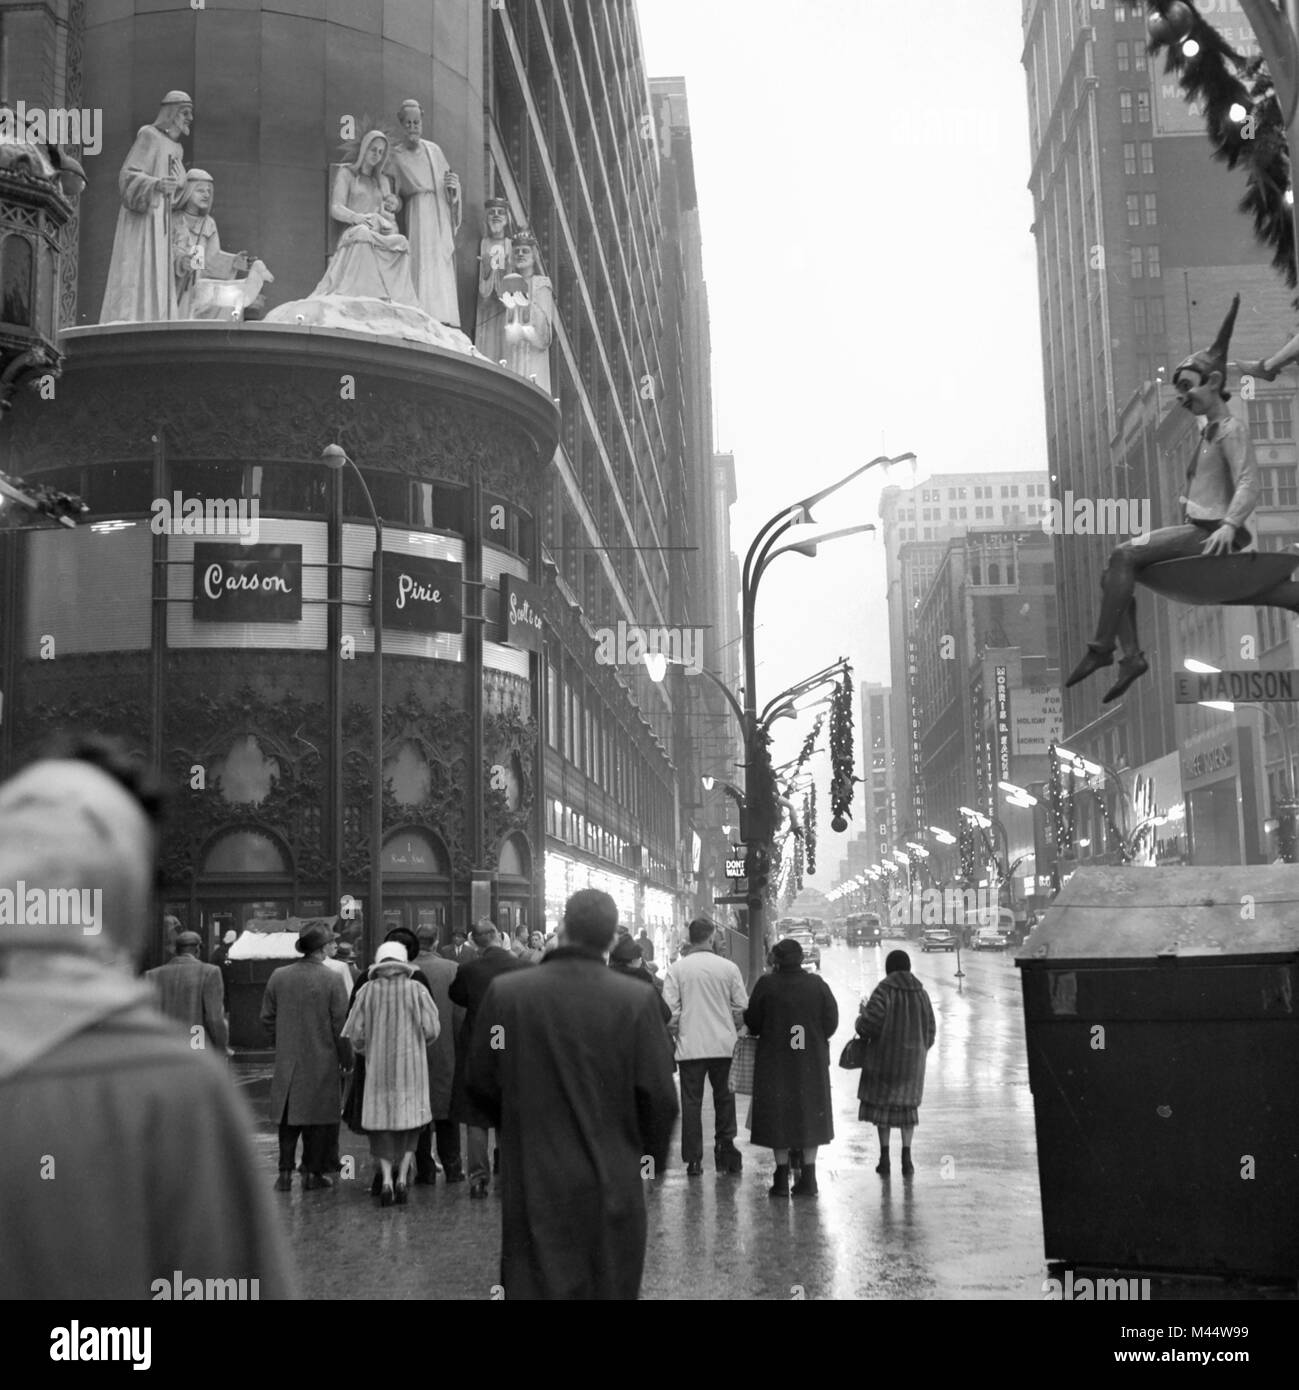 It's a warm and foggy day at the corner of State and Madison in Chicago during Christmas season, ca. 1968. Stock Photo